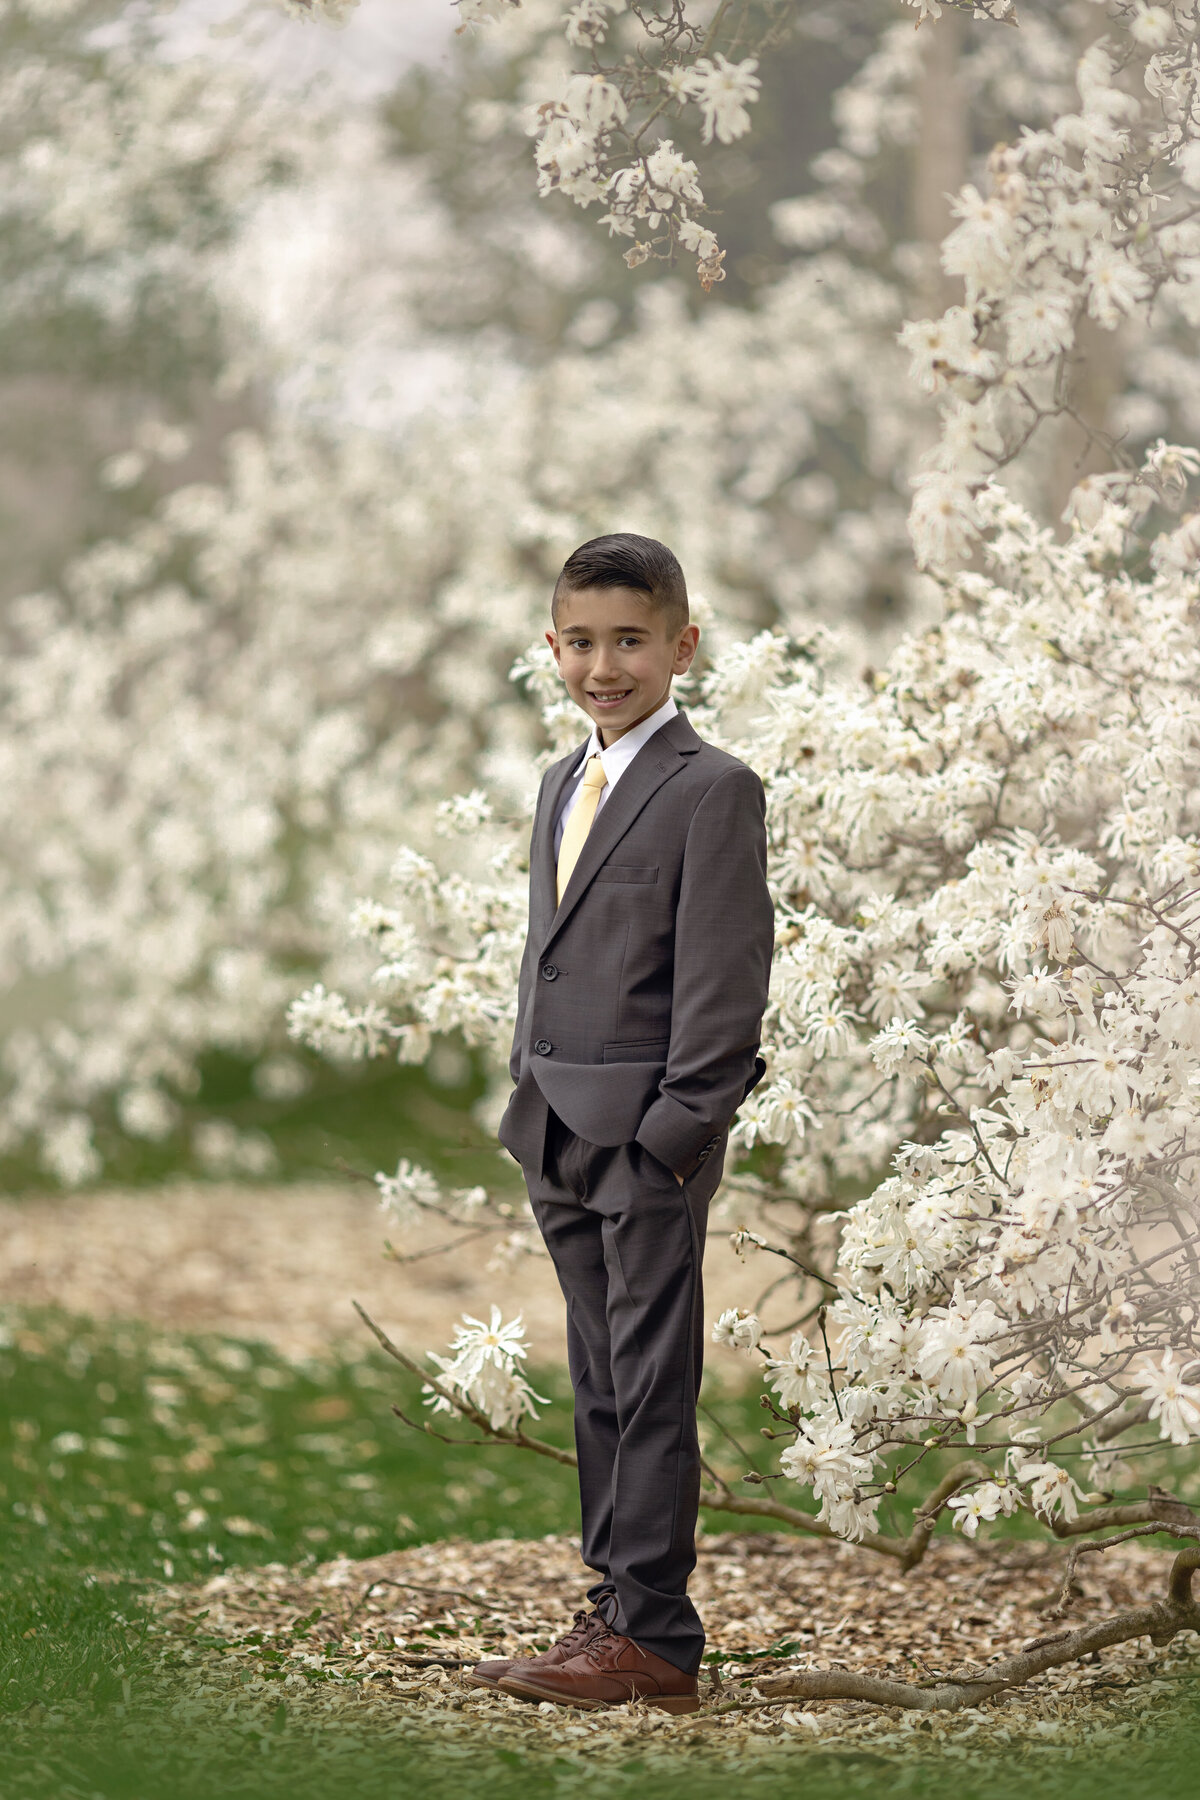 A young boy in a grey suit stands in a park among a white flowering tree